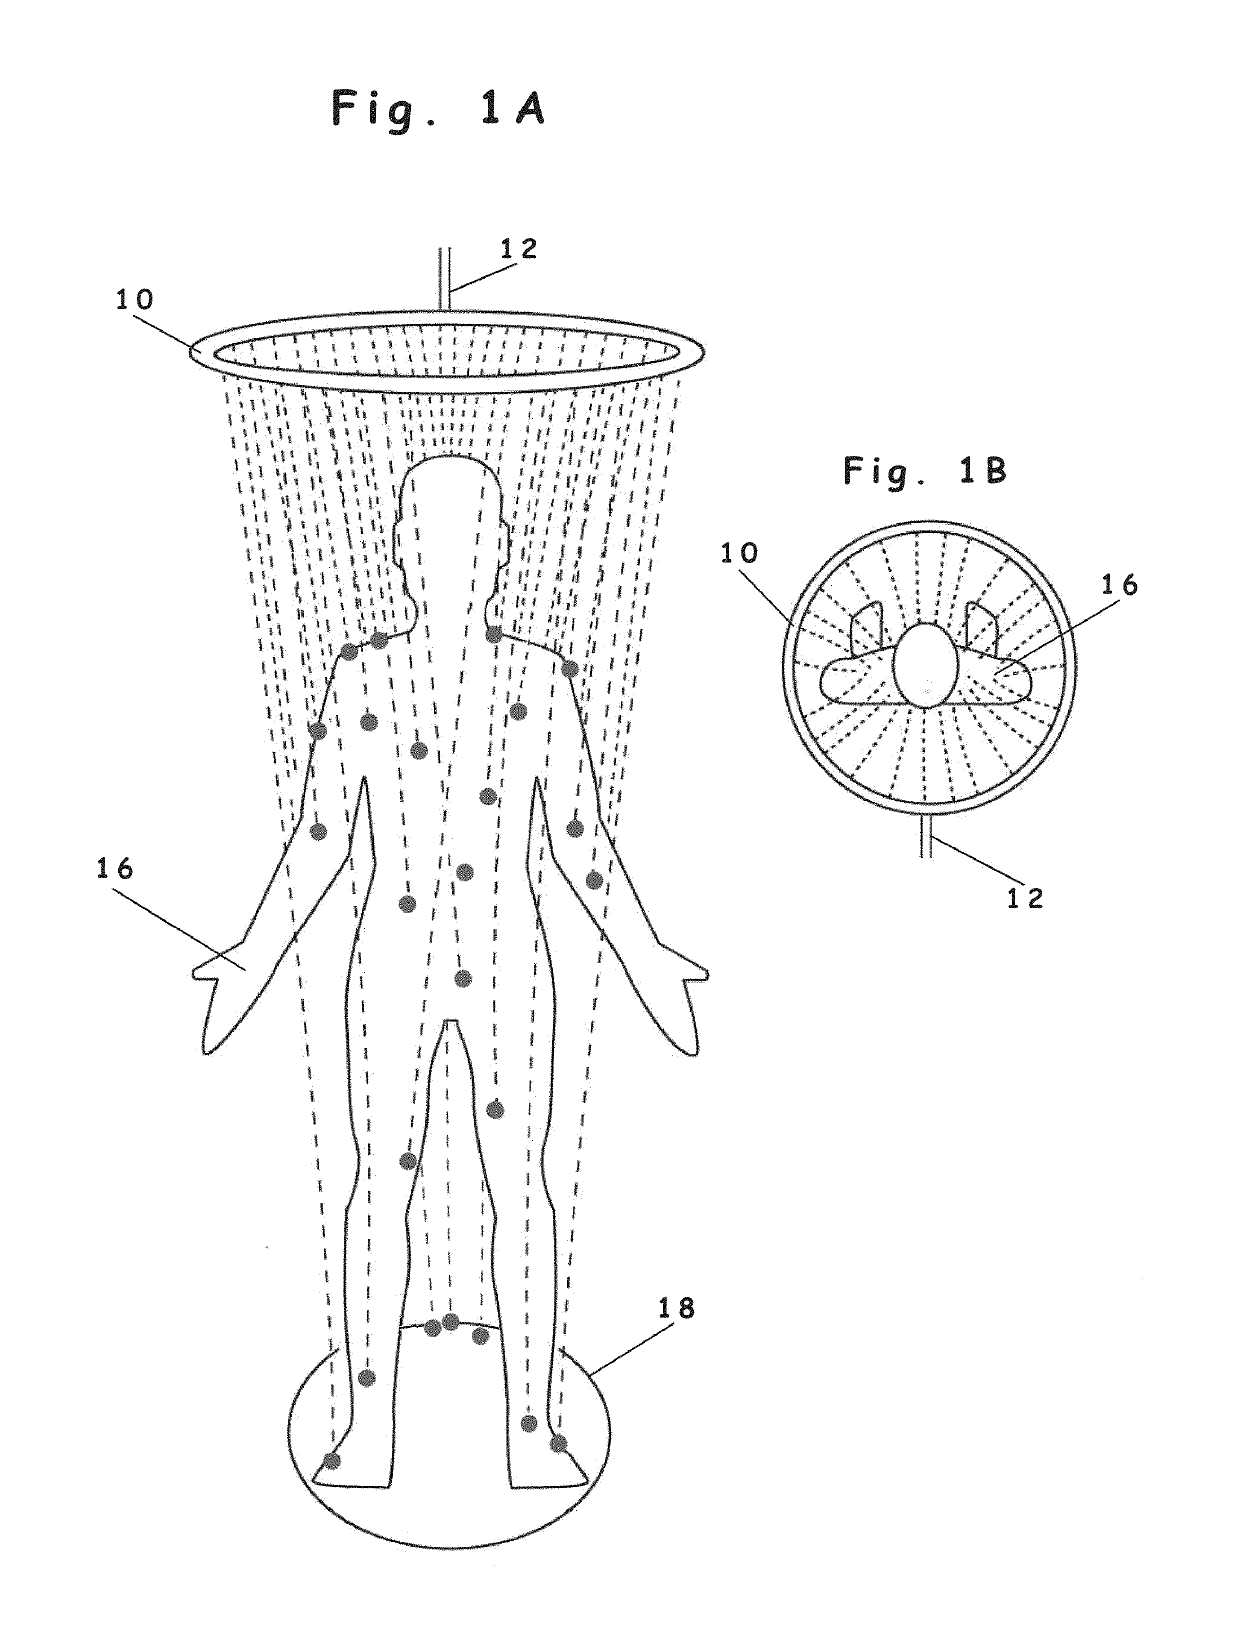 Tubular shower apparatus, systems and methods